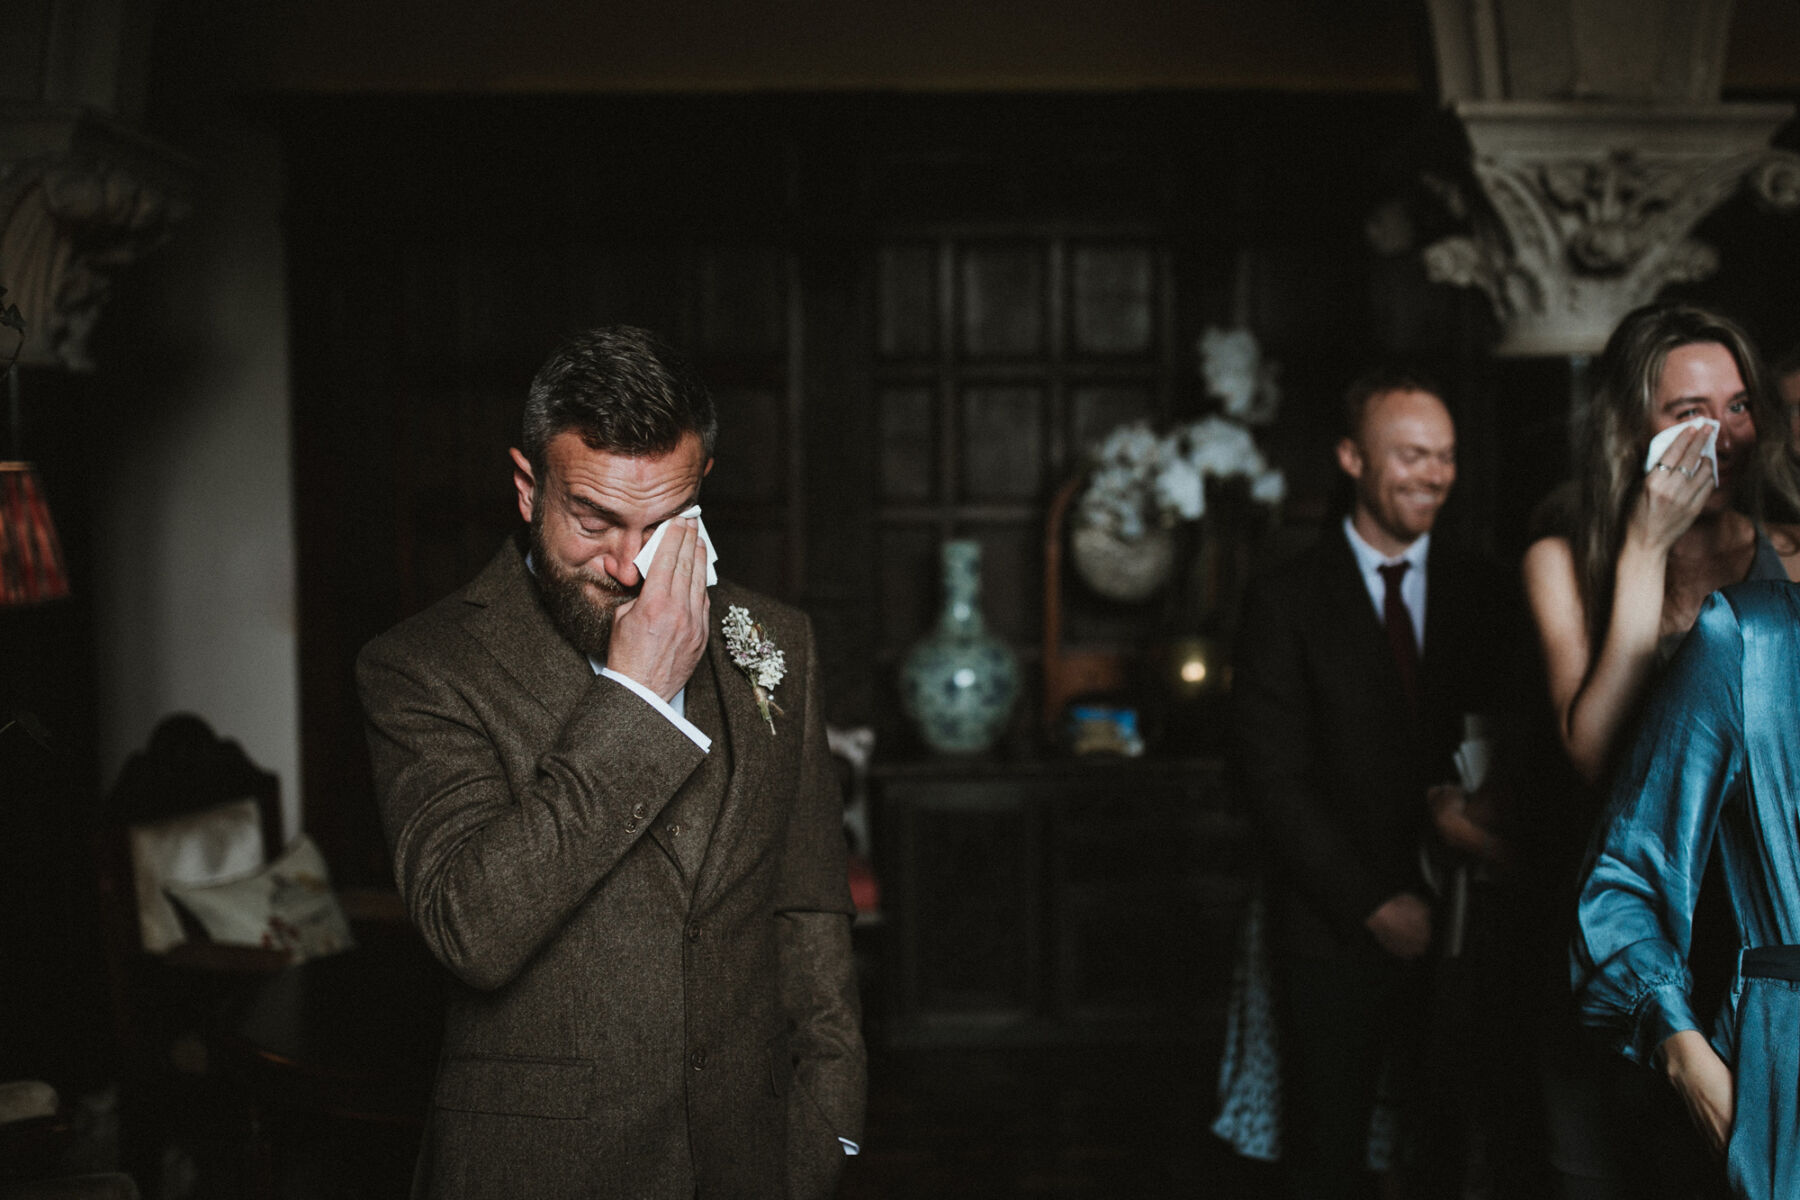 Groom wiping a tear from his eye as he waits for his bride.